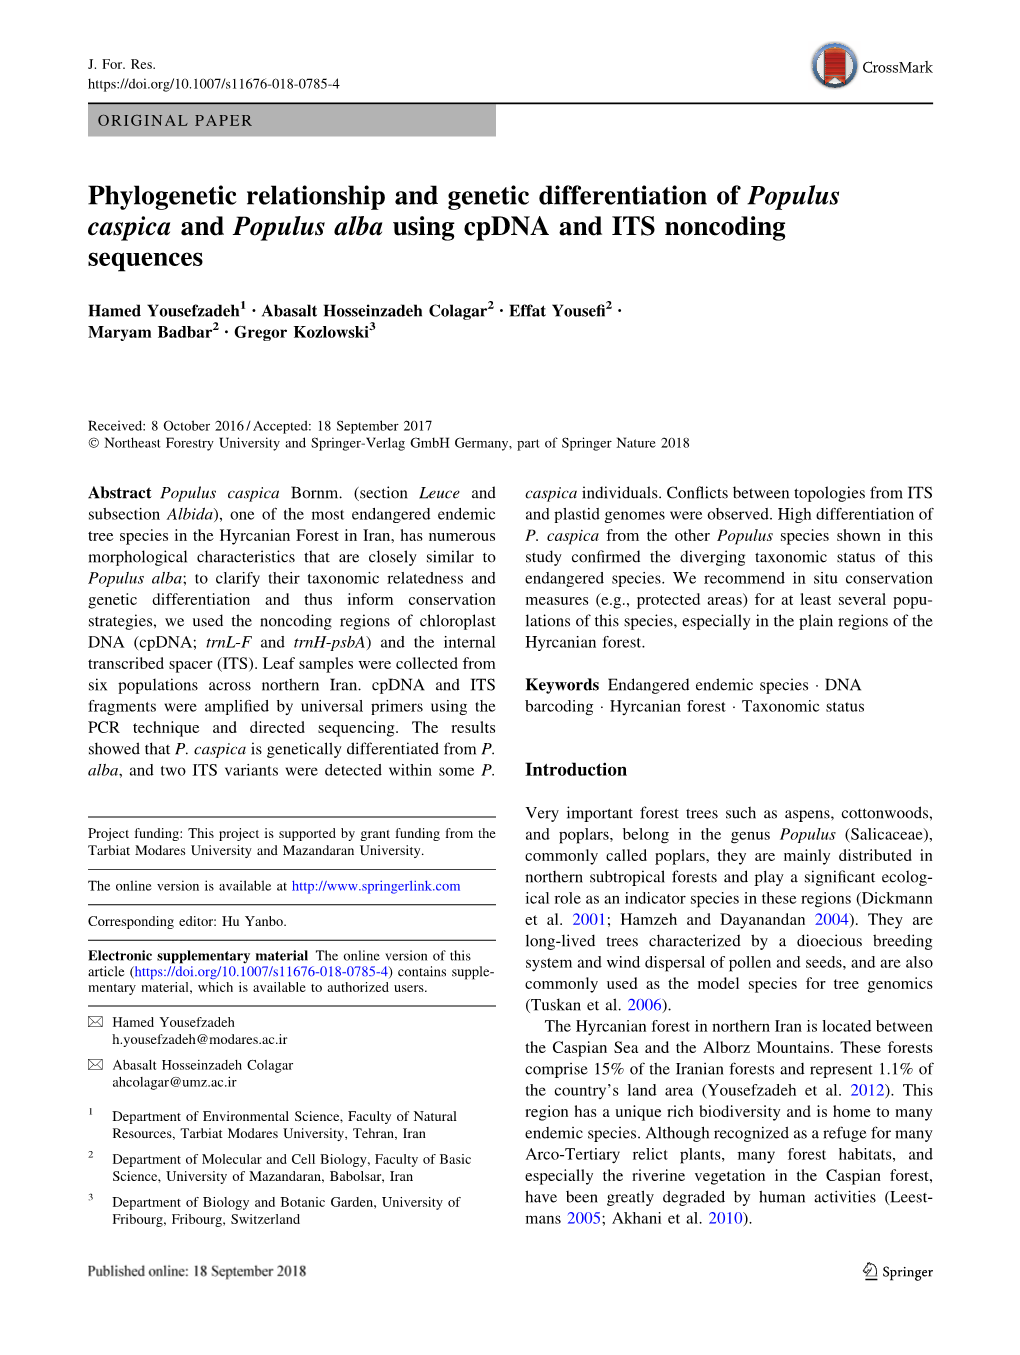 Phylogenetic Relationship and Genetic Differentiation of Populus Caspica and Populus Alba Using Cpdna and ITS Noncoding Sequences